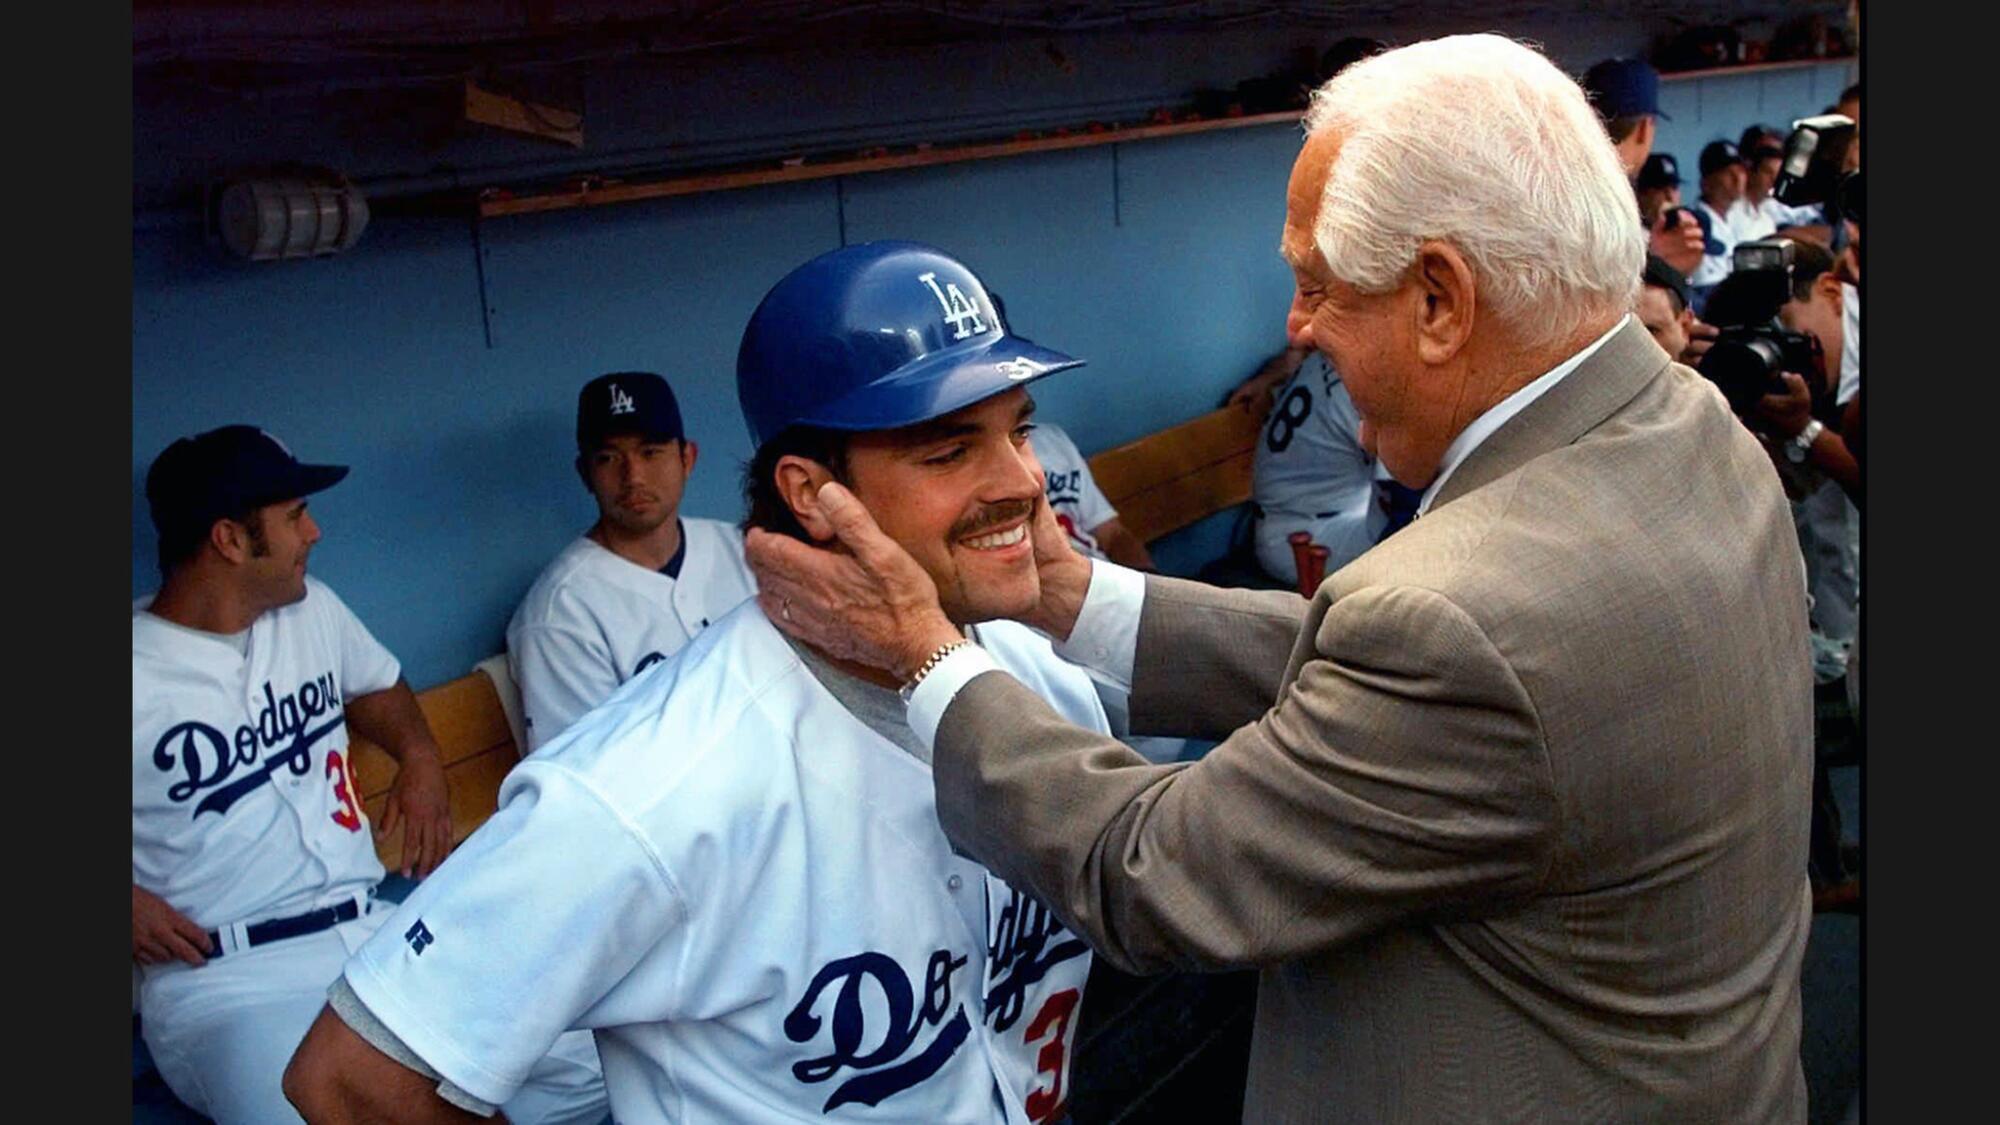 Tommy Lasorda shares a tender moment with catcher Mike Piazza before the Dodgers retired Lasorda's jersey on Aug. 15, 1997.